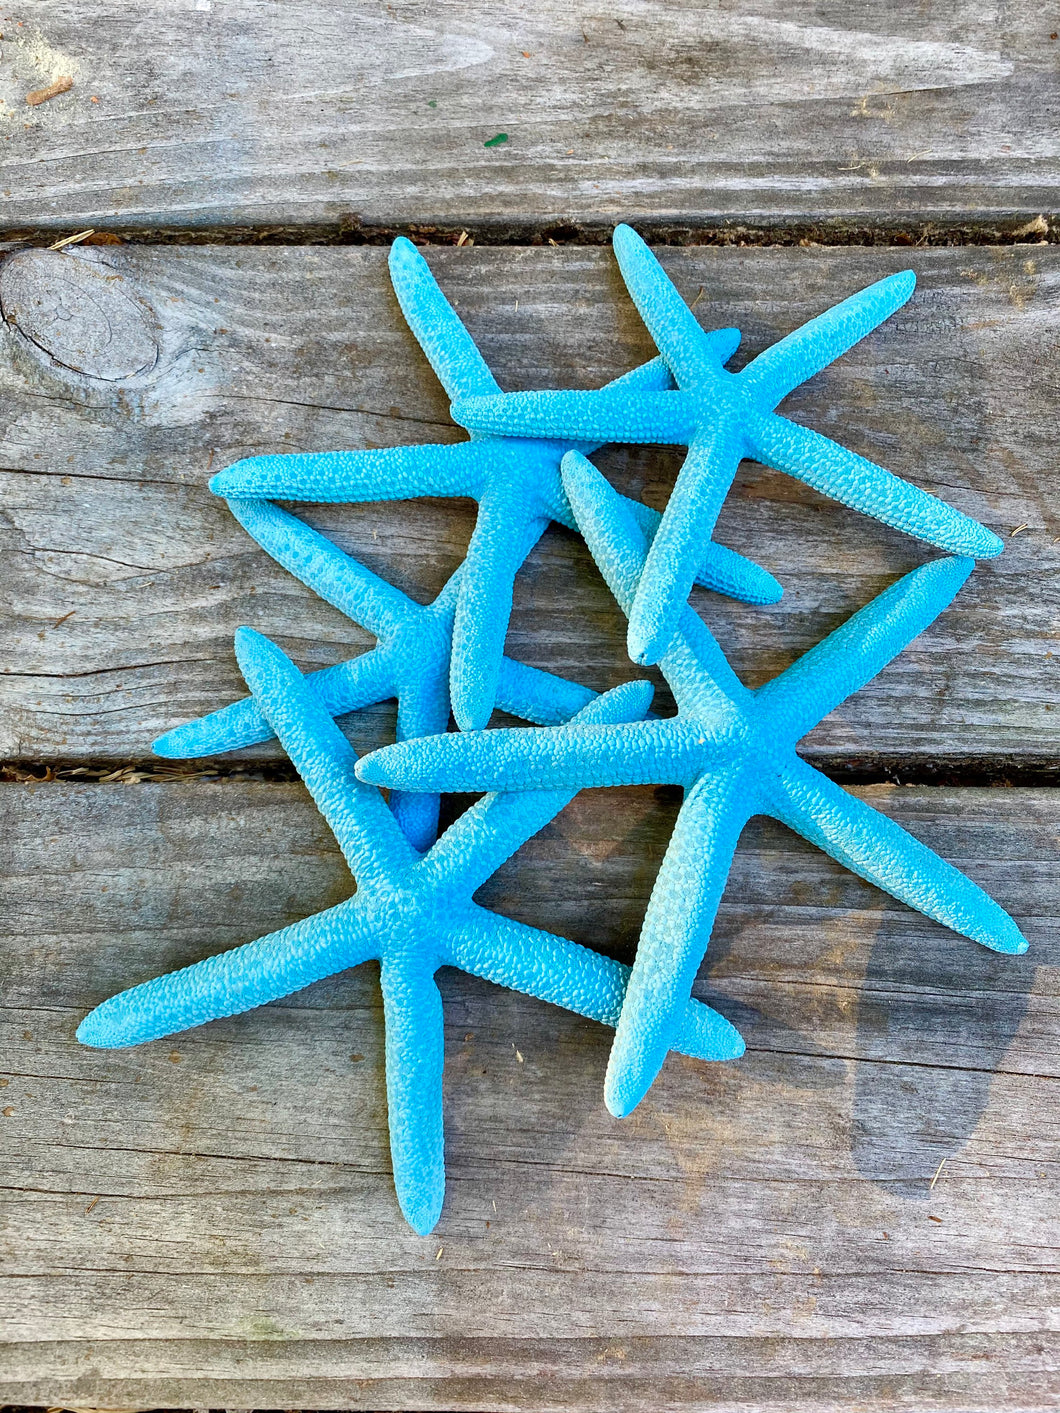 Turquoise Natural Pencil Starfish for Beach or Nautical Decor, 4